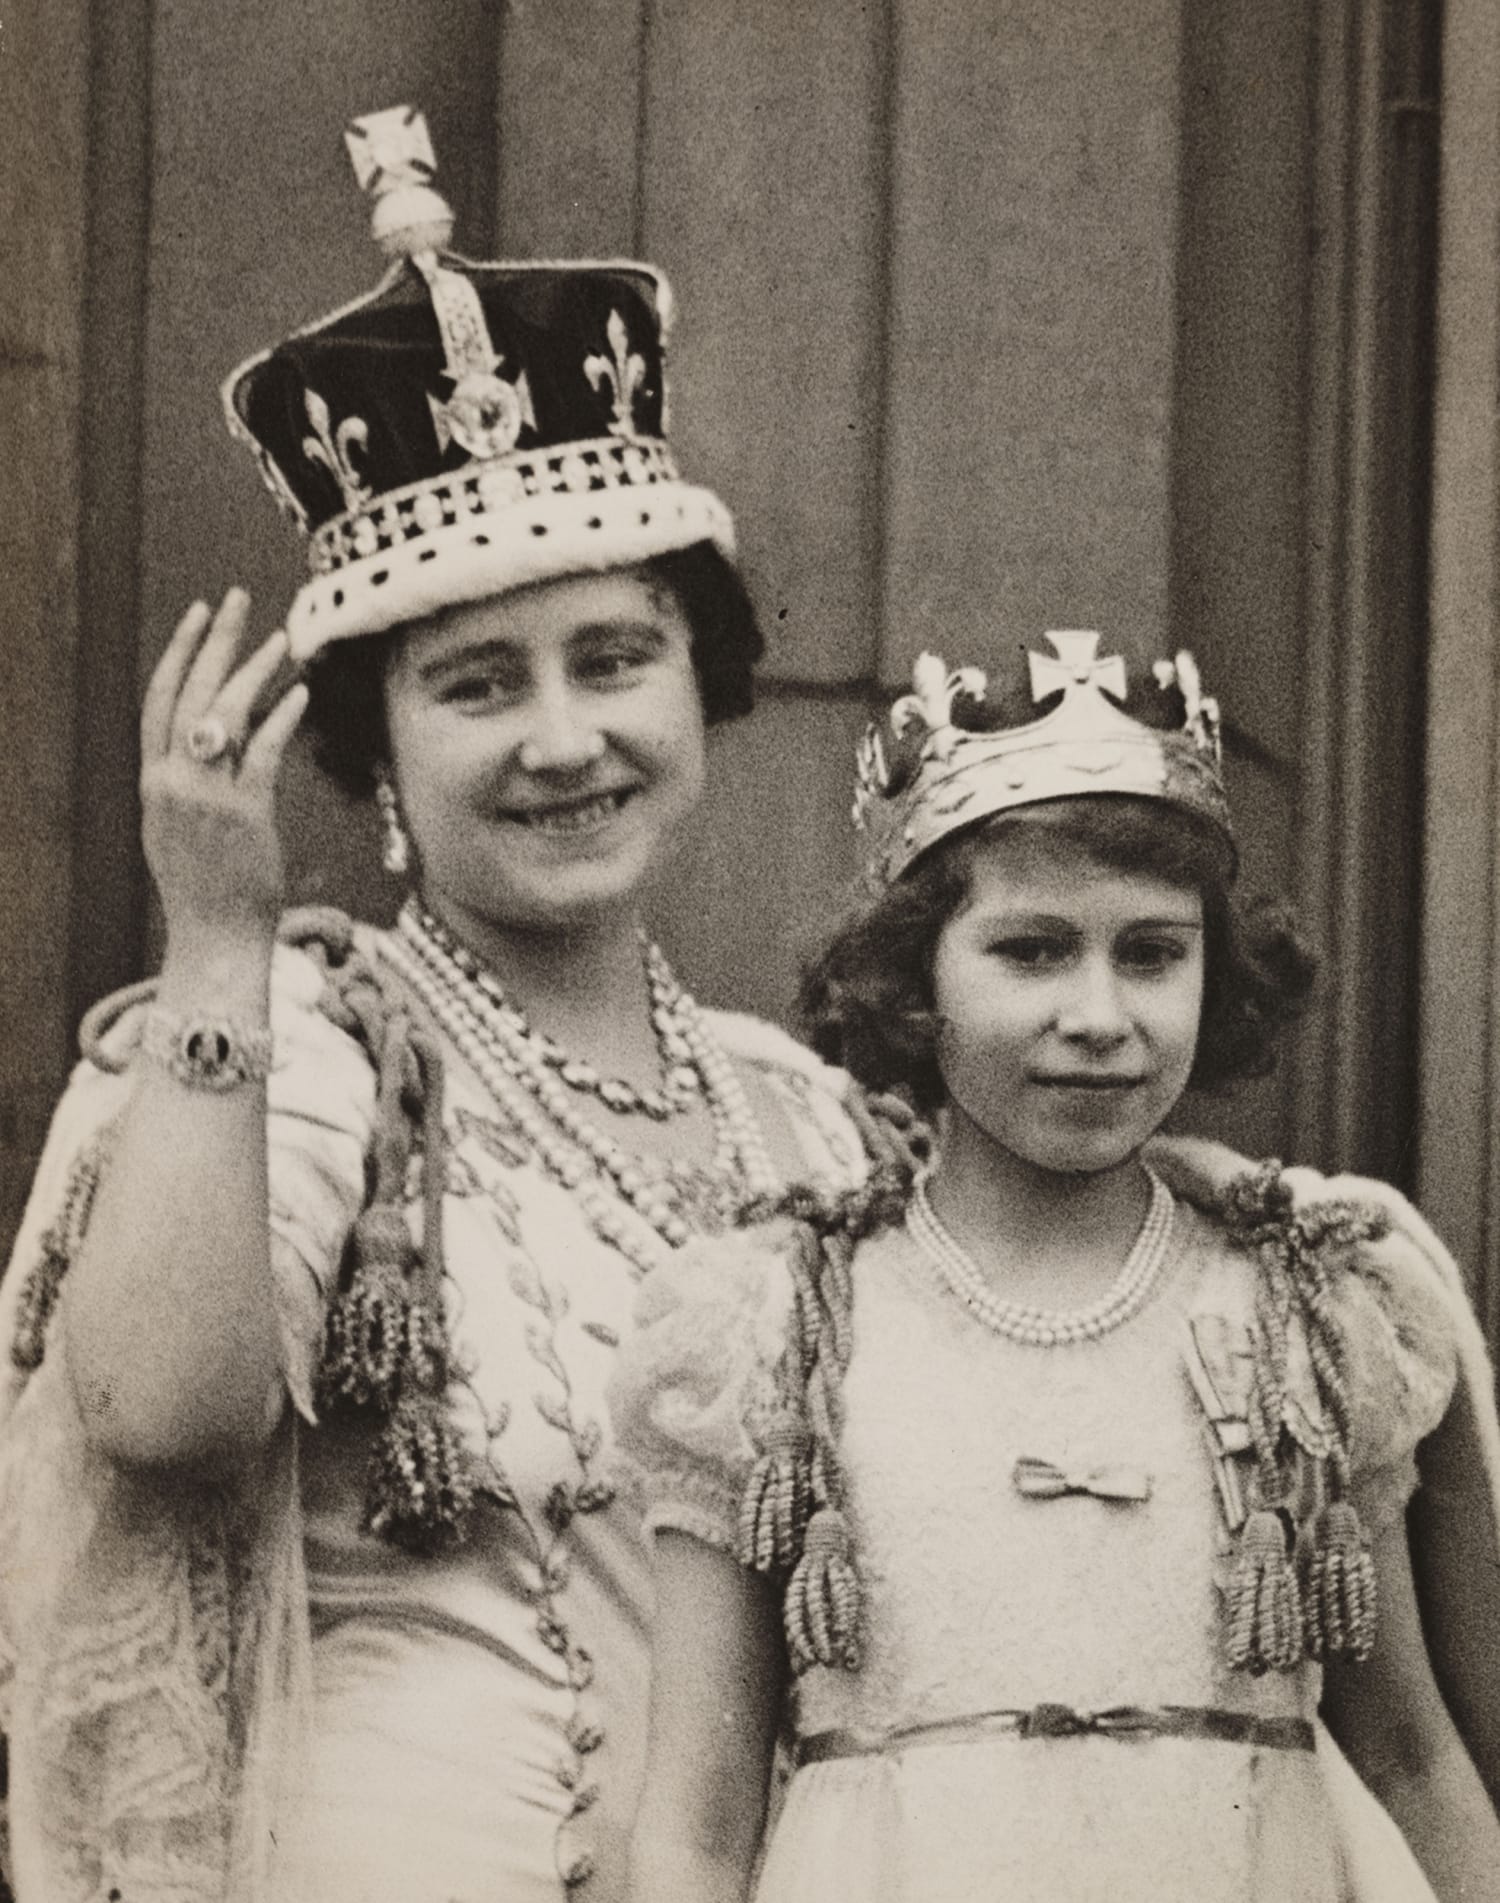 Who Becomes the King of England After Queen Elizabeth?